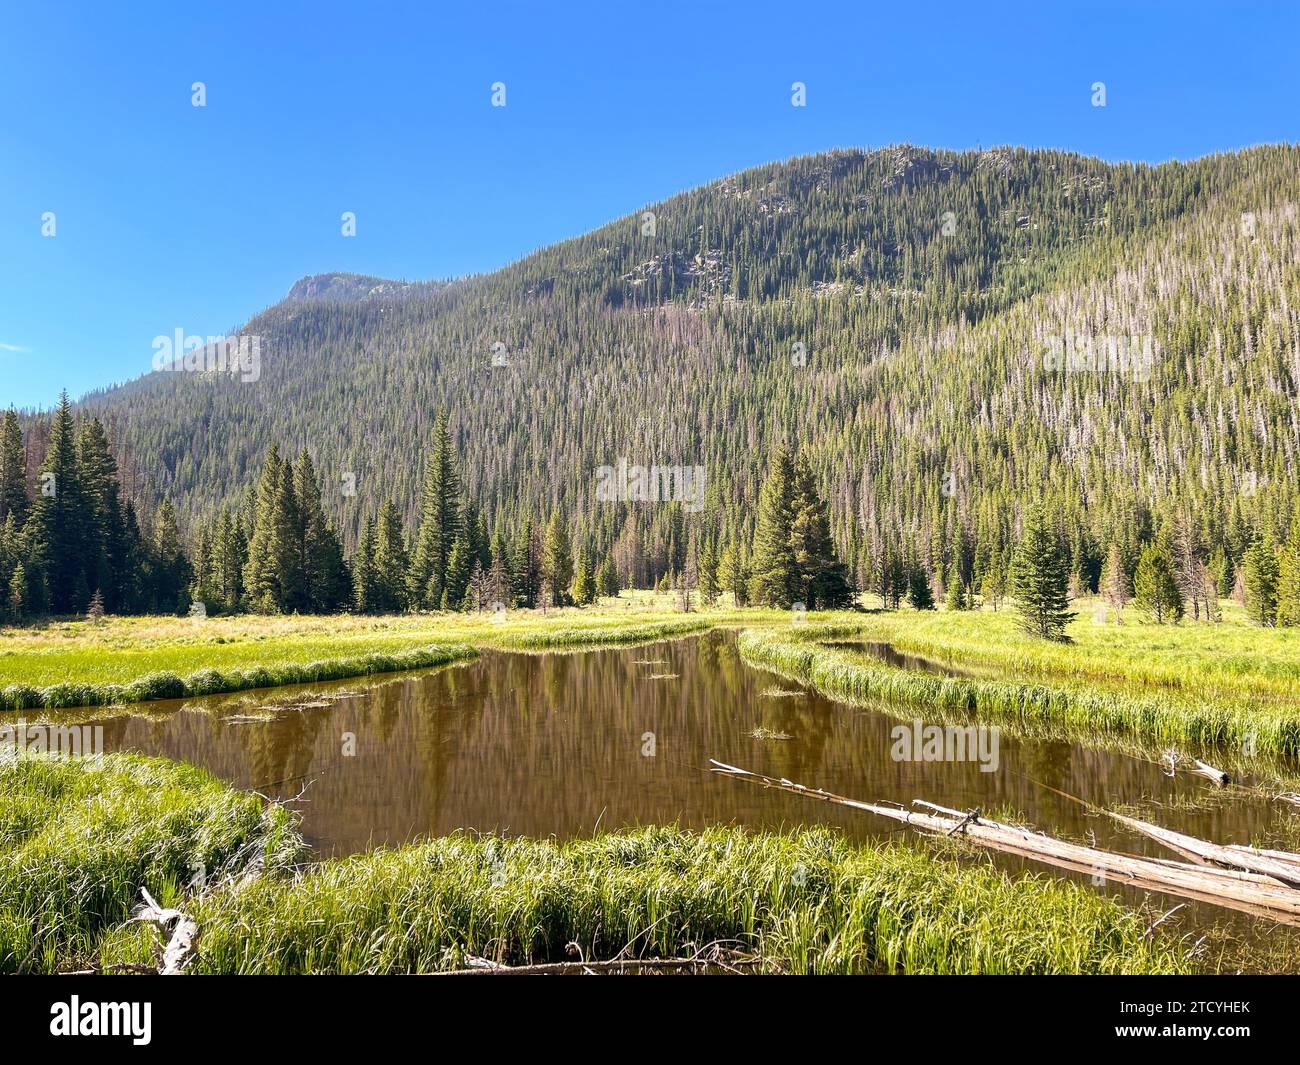 A tranquil mountain lake mirrors the lush forest and clear blue skies in the serene landscape of Rocky Mountain National Park, Colorado. Stock Photo